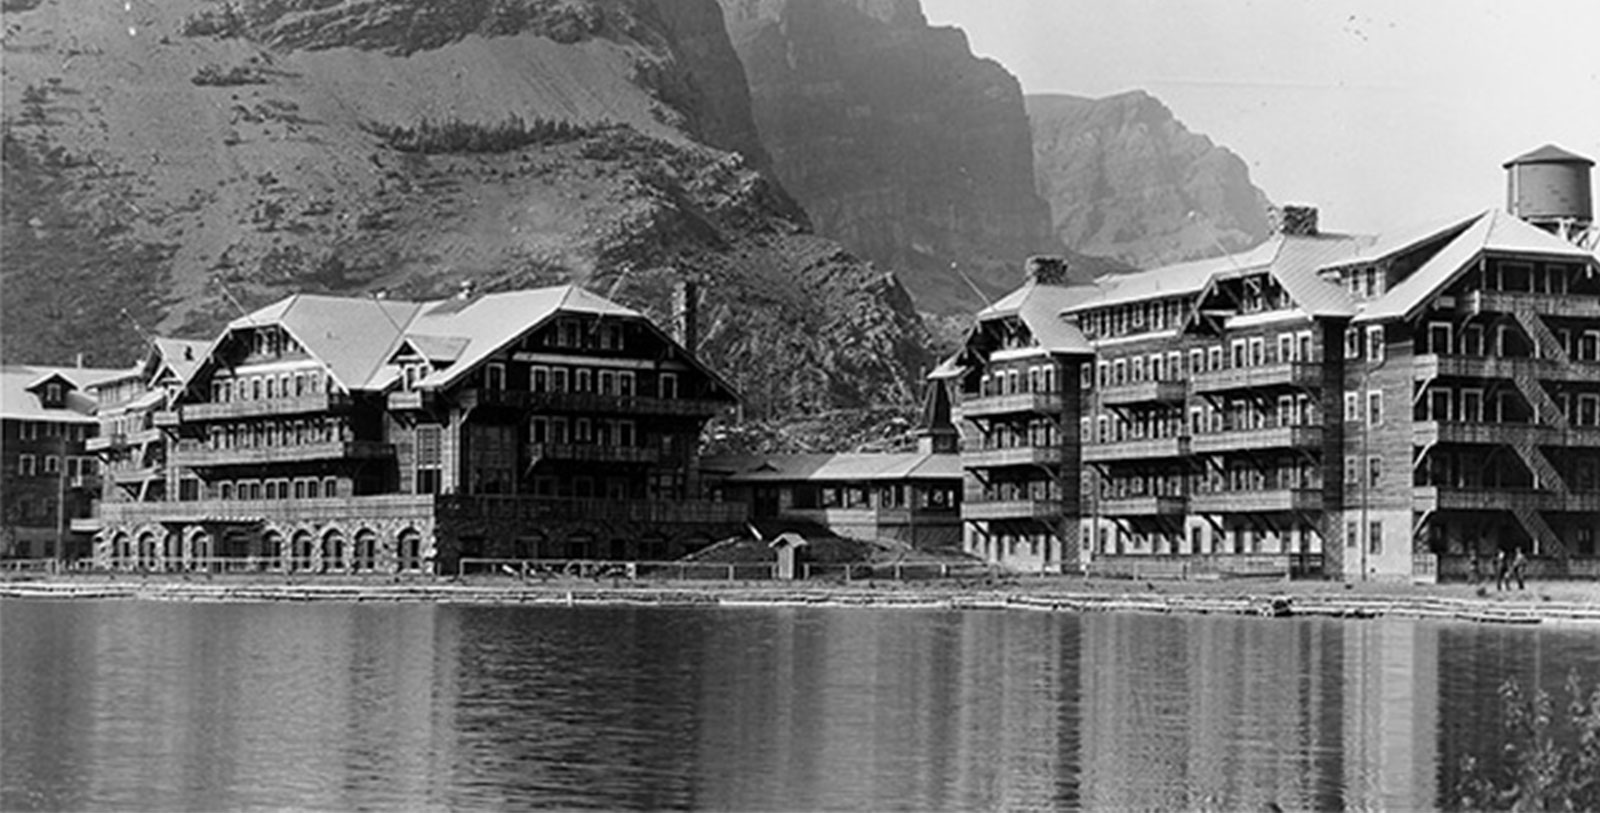 Discover the style of architecture known as National Park Service Rustic that defines the appearance of the Many Glacier Hotel.